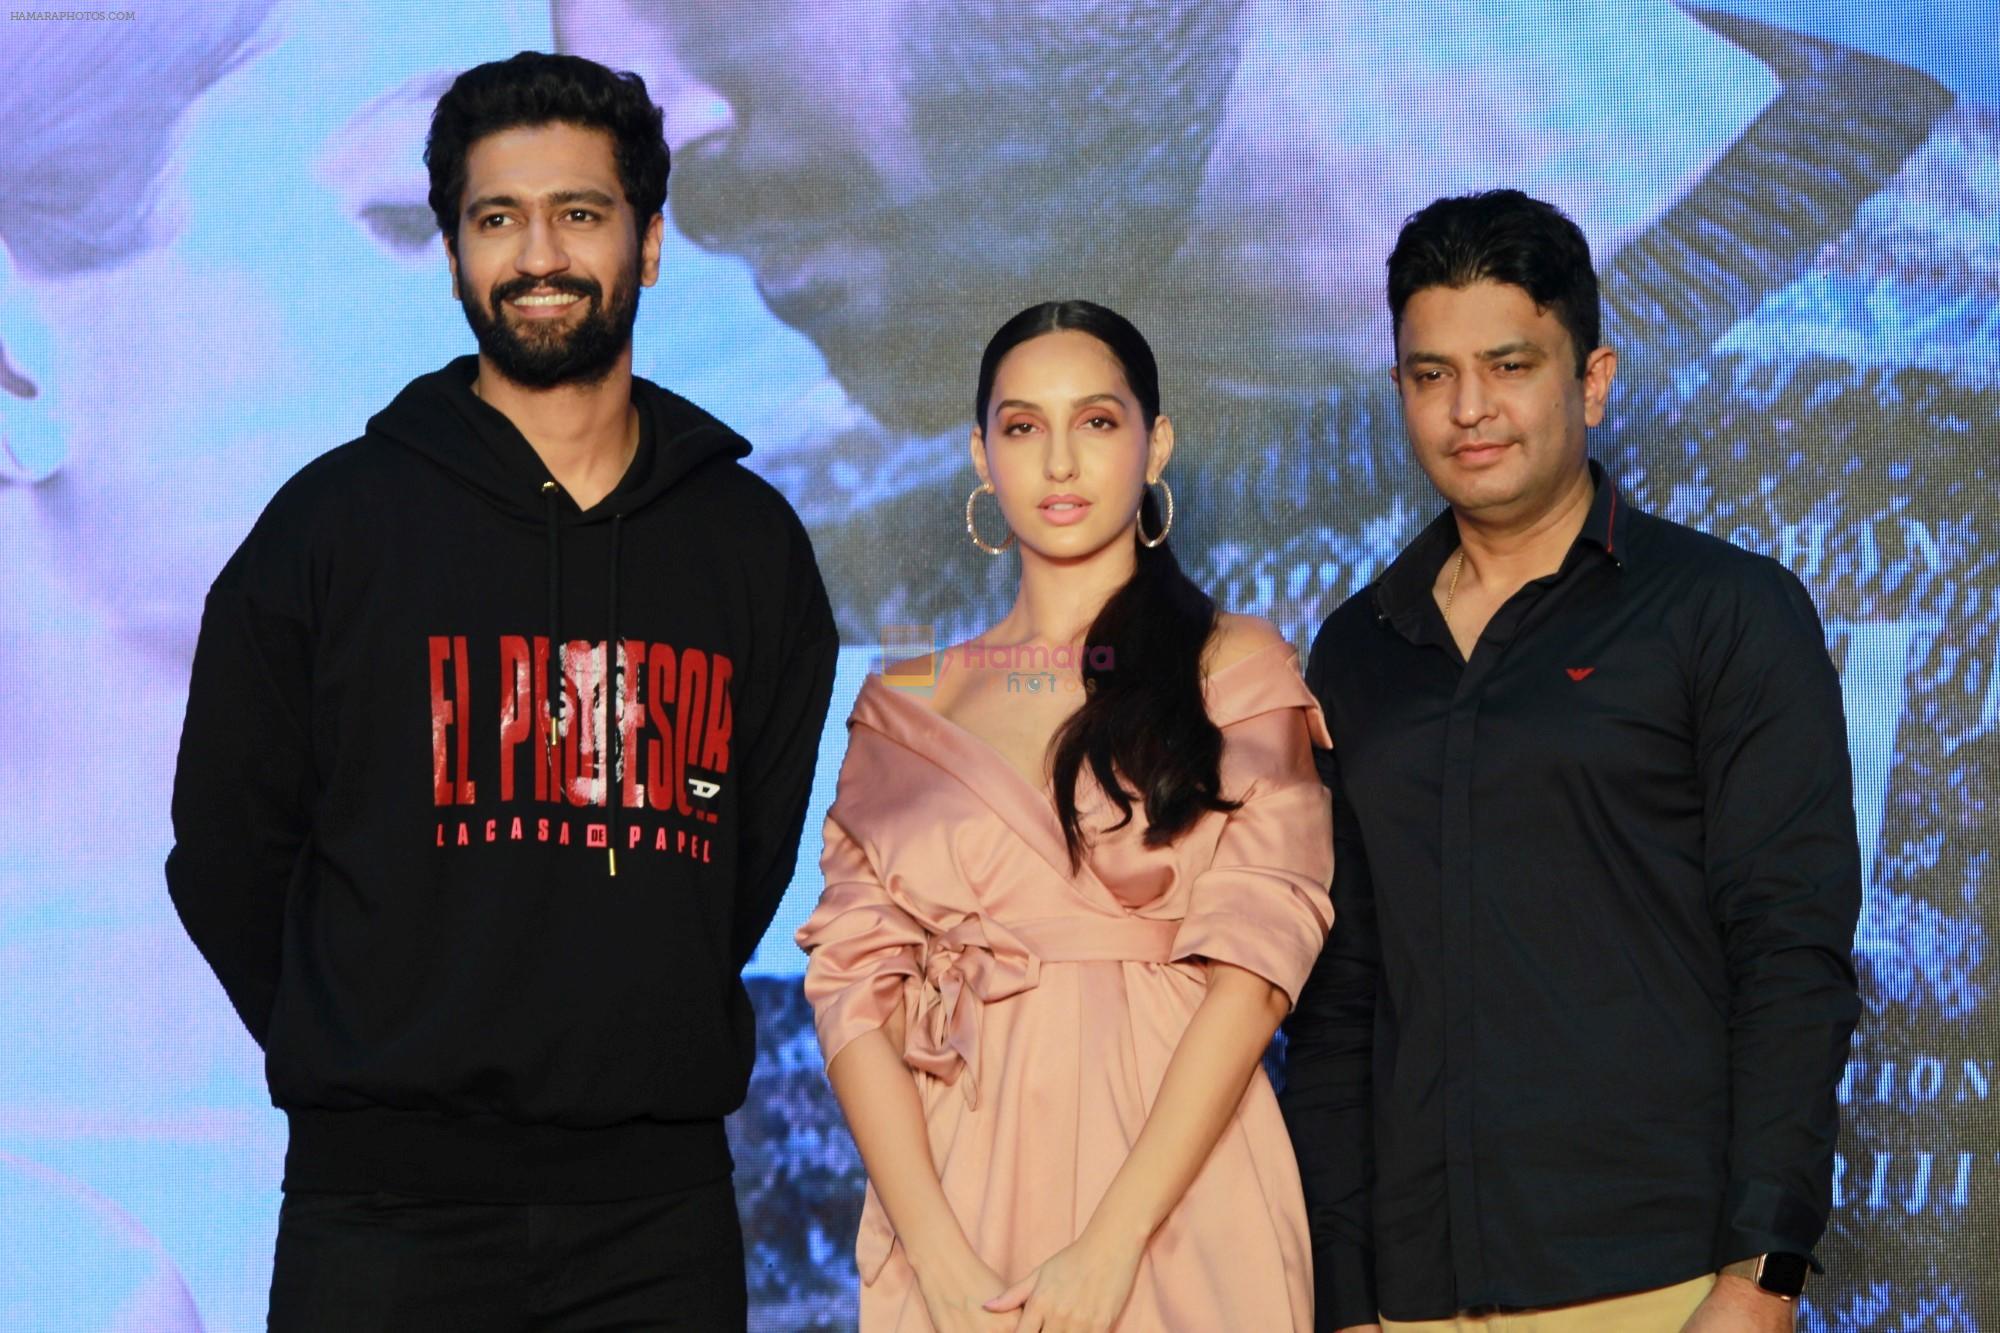 Vicky Kaushal, Nora Fatehi, Bhushan Kumar Celebrate The Success Of Single Song Pachtaoge on 27th Aug 2019